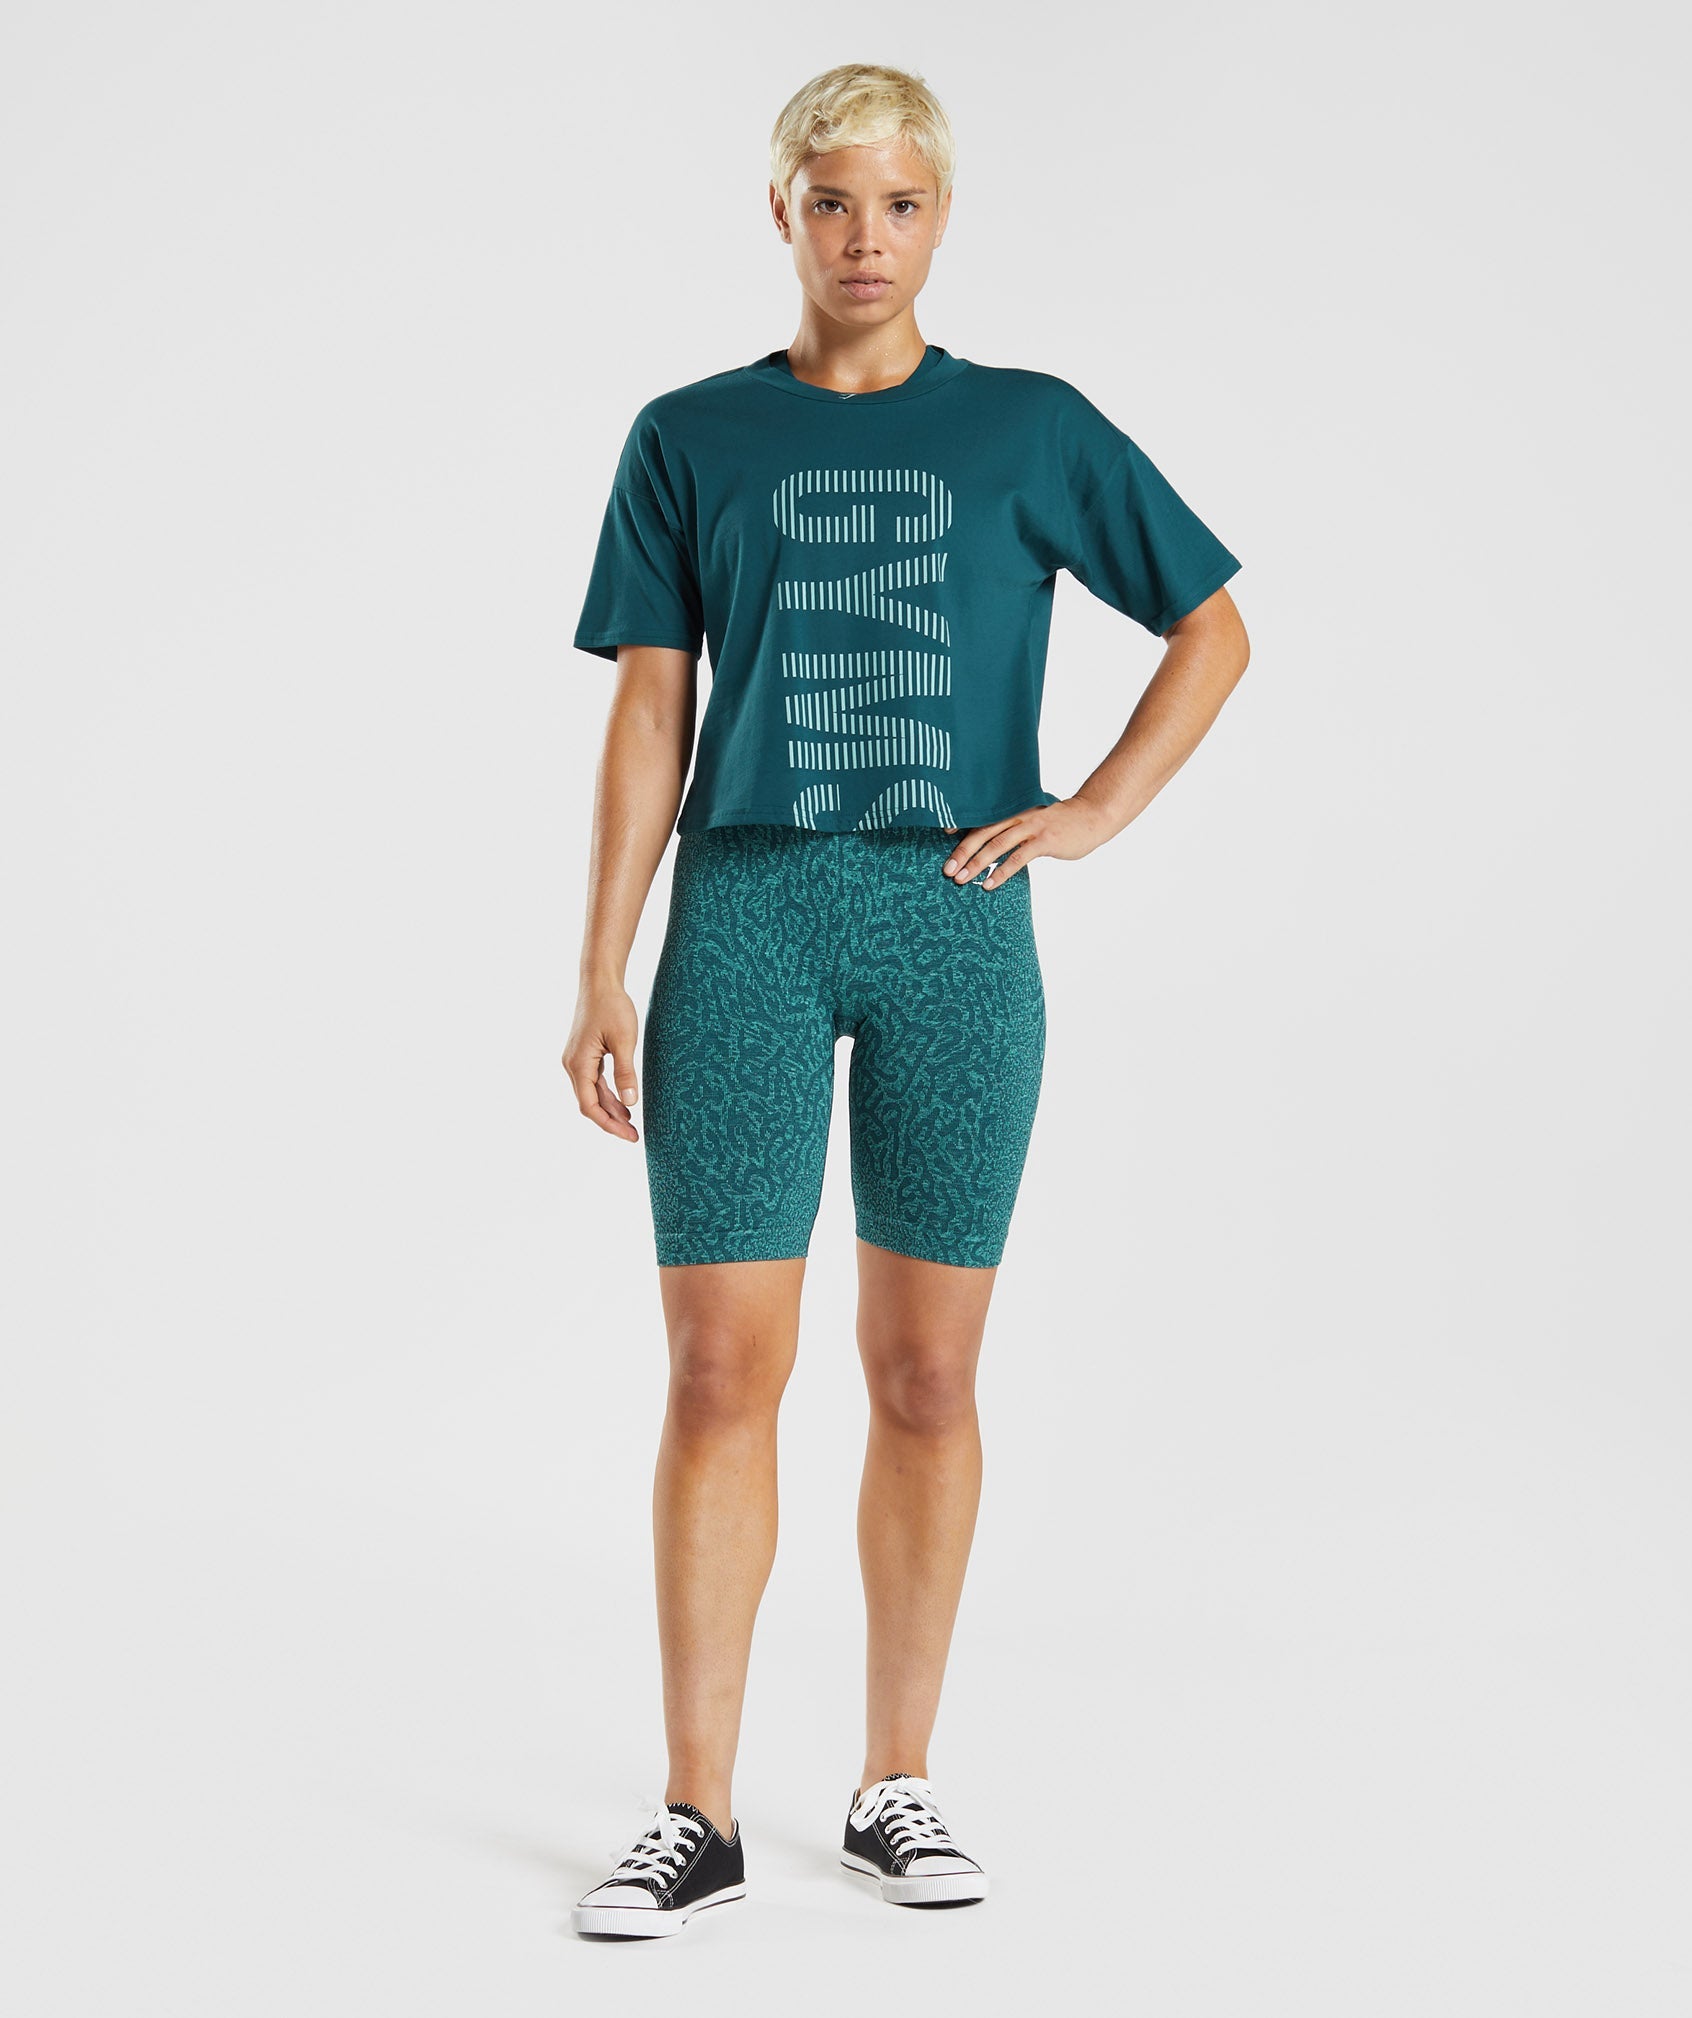 315 Midi T-Shirt in Winter Teal/Pearl Blue - view 4